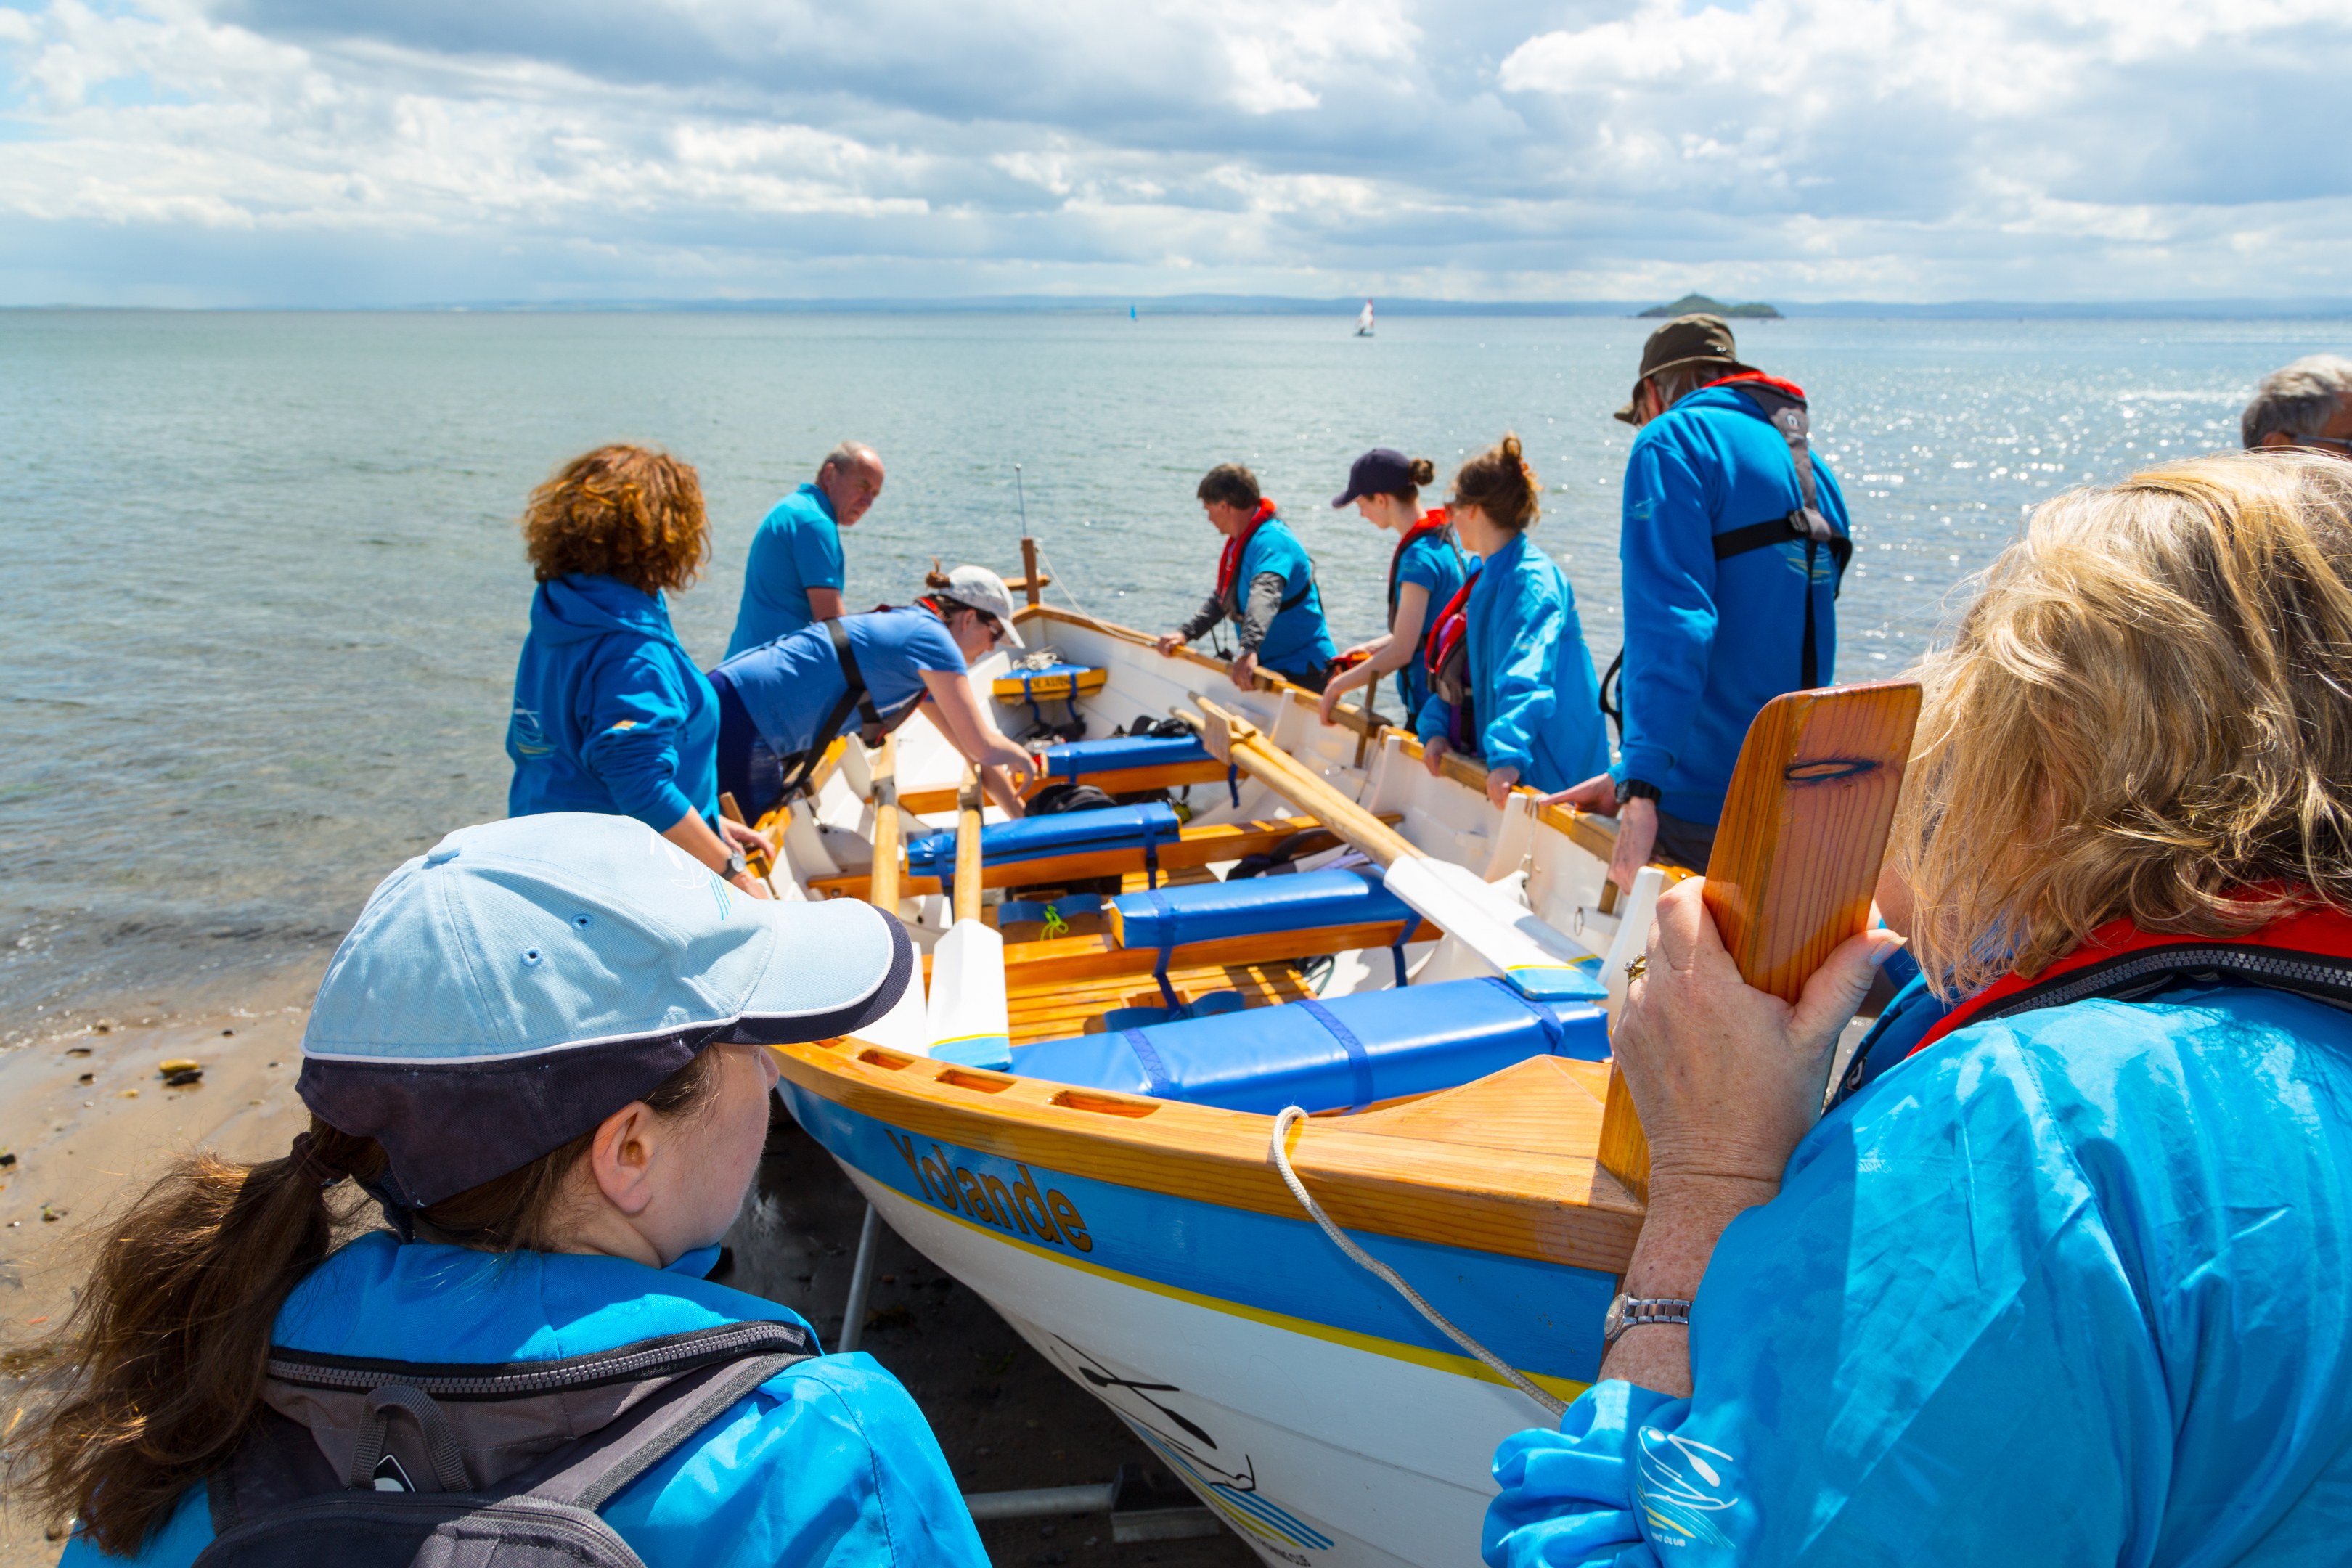 Members of Kinghorn Coastal Rowing Club preparing the boat on their one year anniversary of their first boat launch.